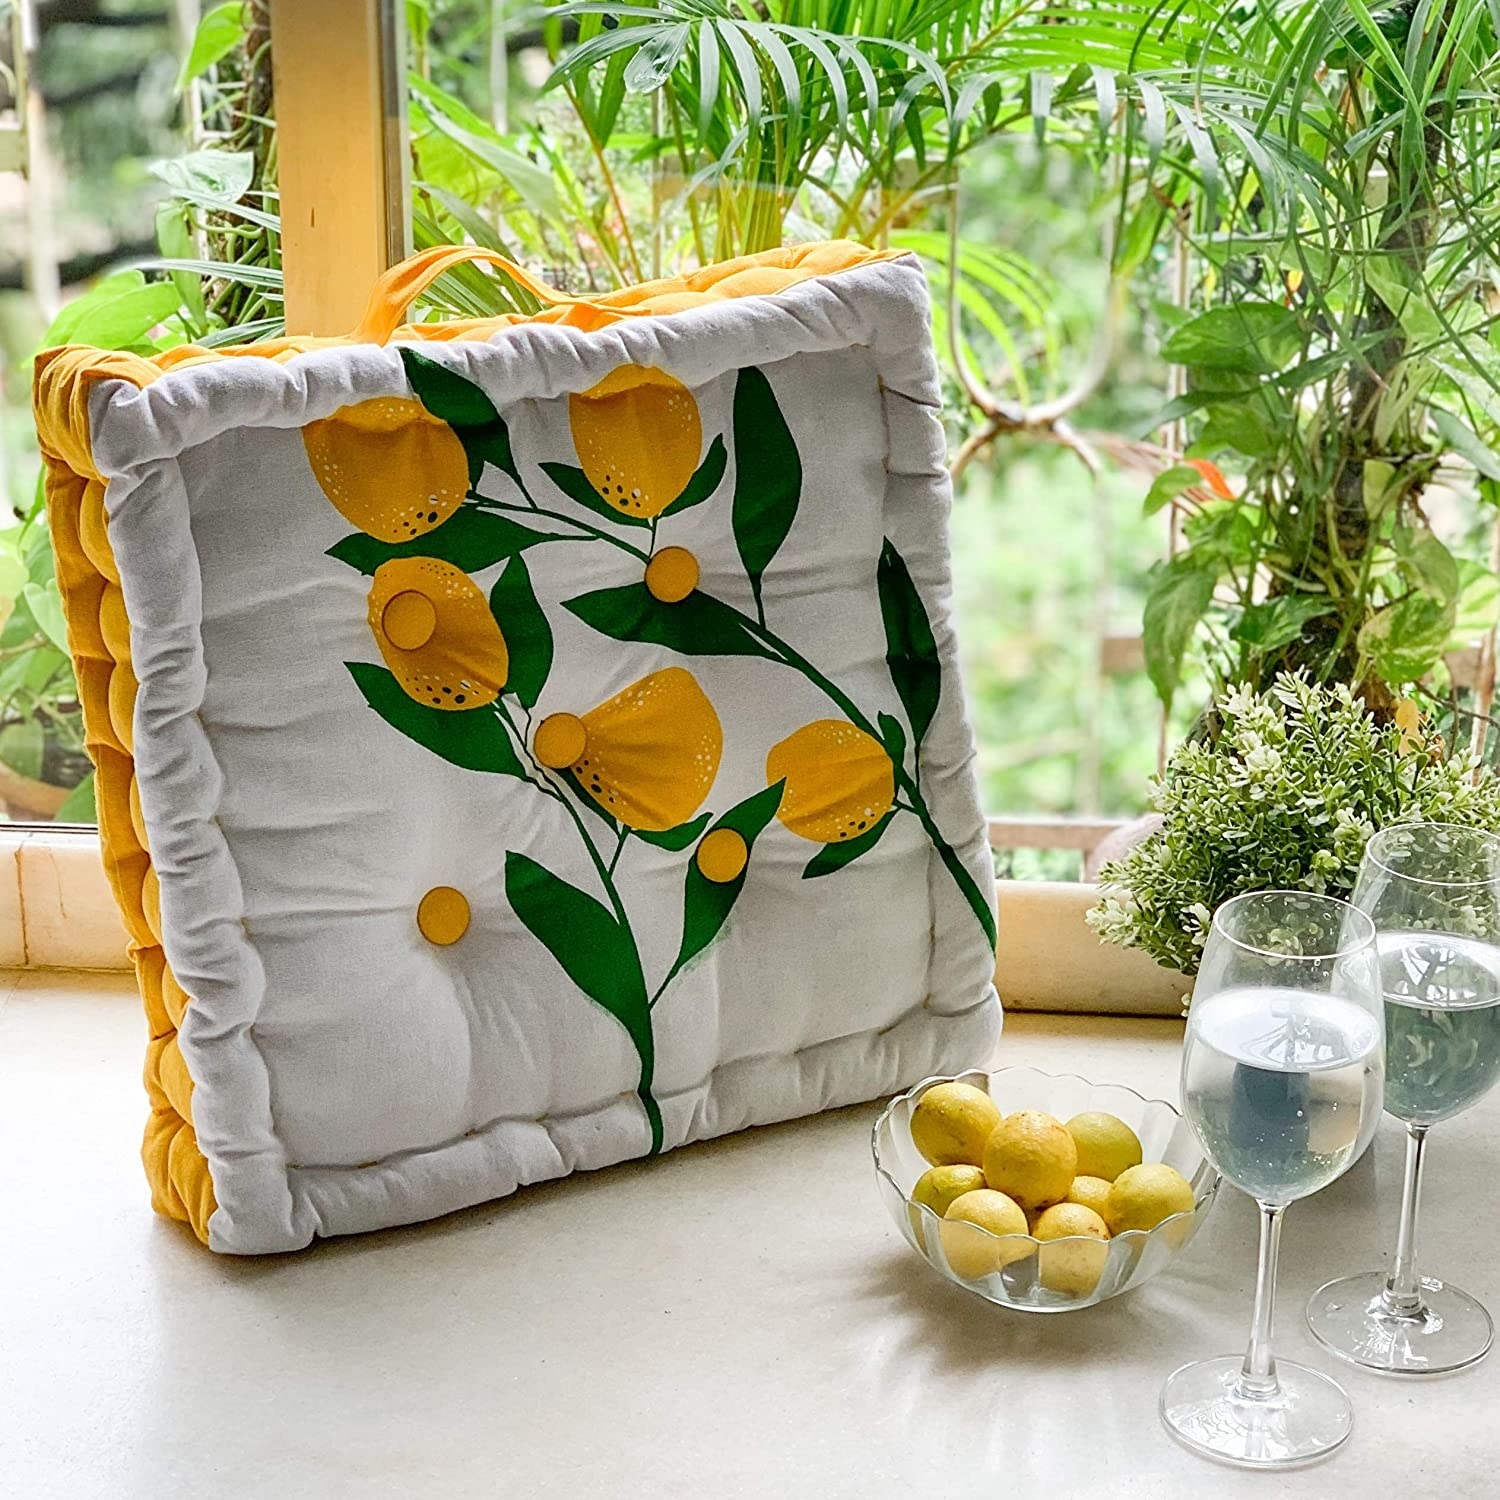 A white and yellow floor cushion with a lemon illustration on it.